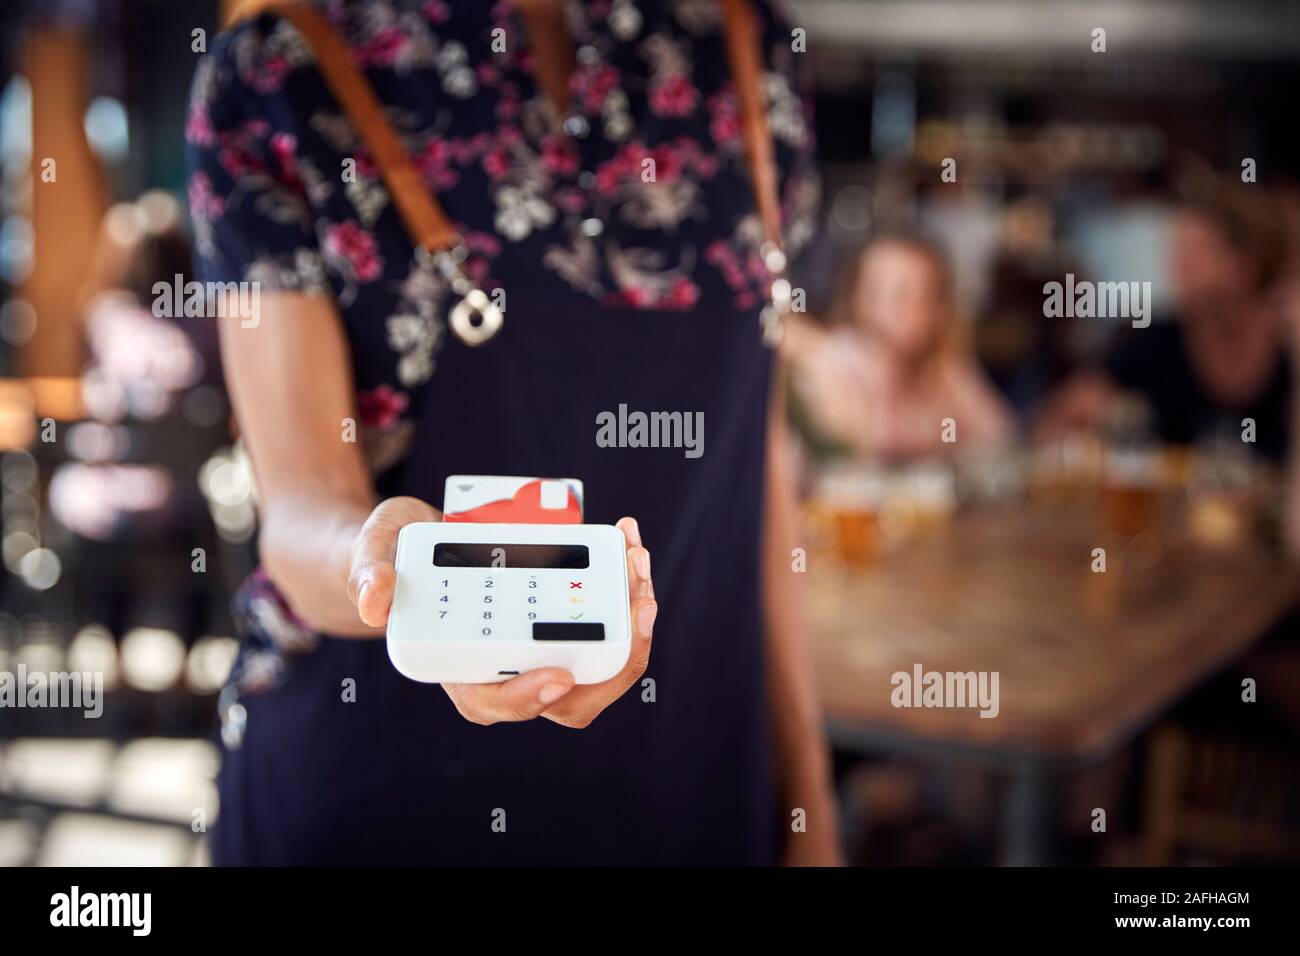 Close Up Of Waitress Holding Credit Card Payment Terminal In Busy Bar Restaurant Stock Photo